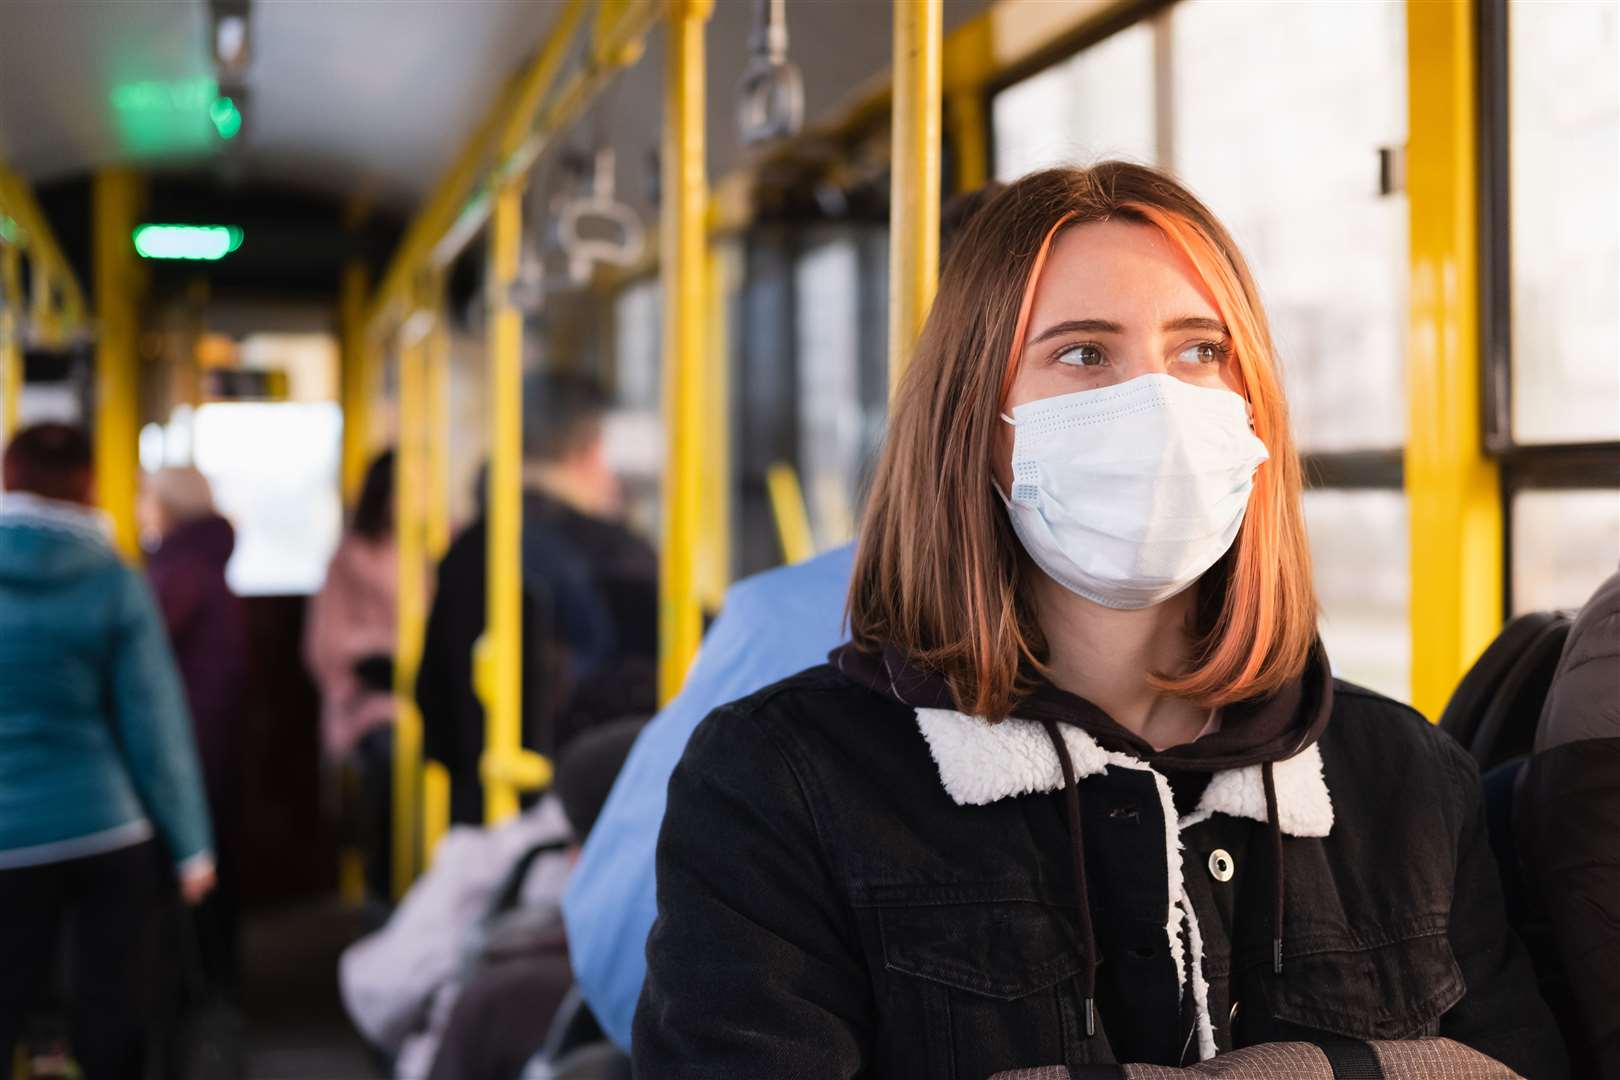 Anyone who needs medical treatment is asked to wear a face mask. Picture: Stock image.